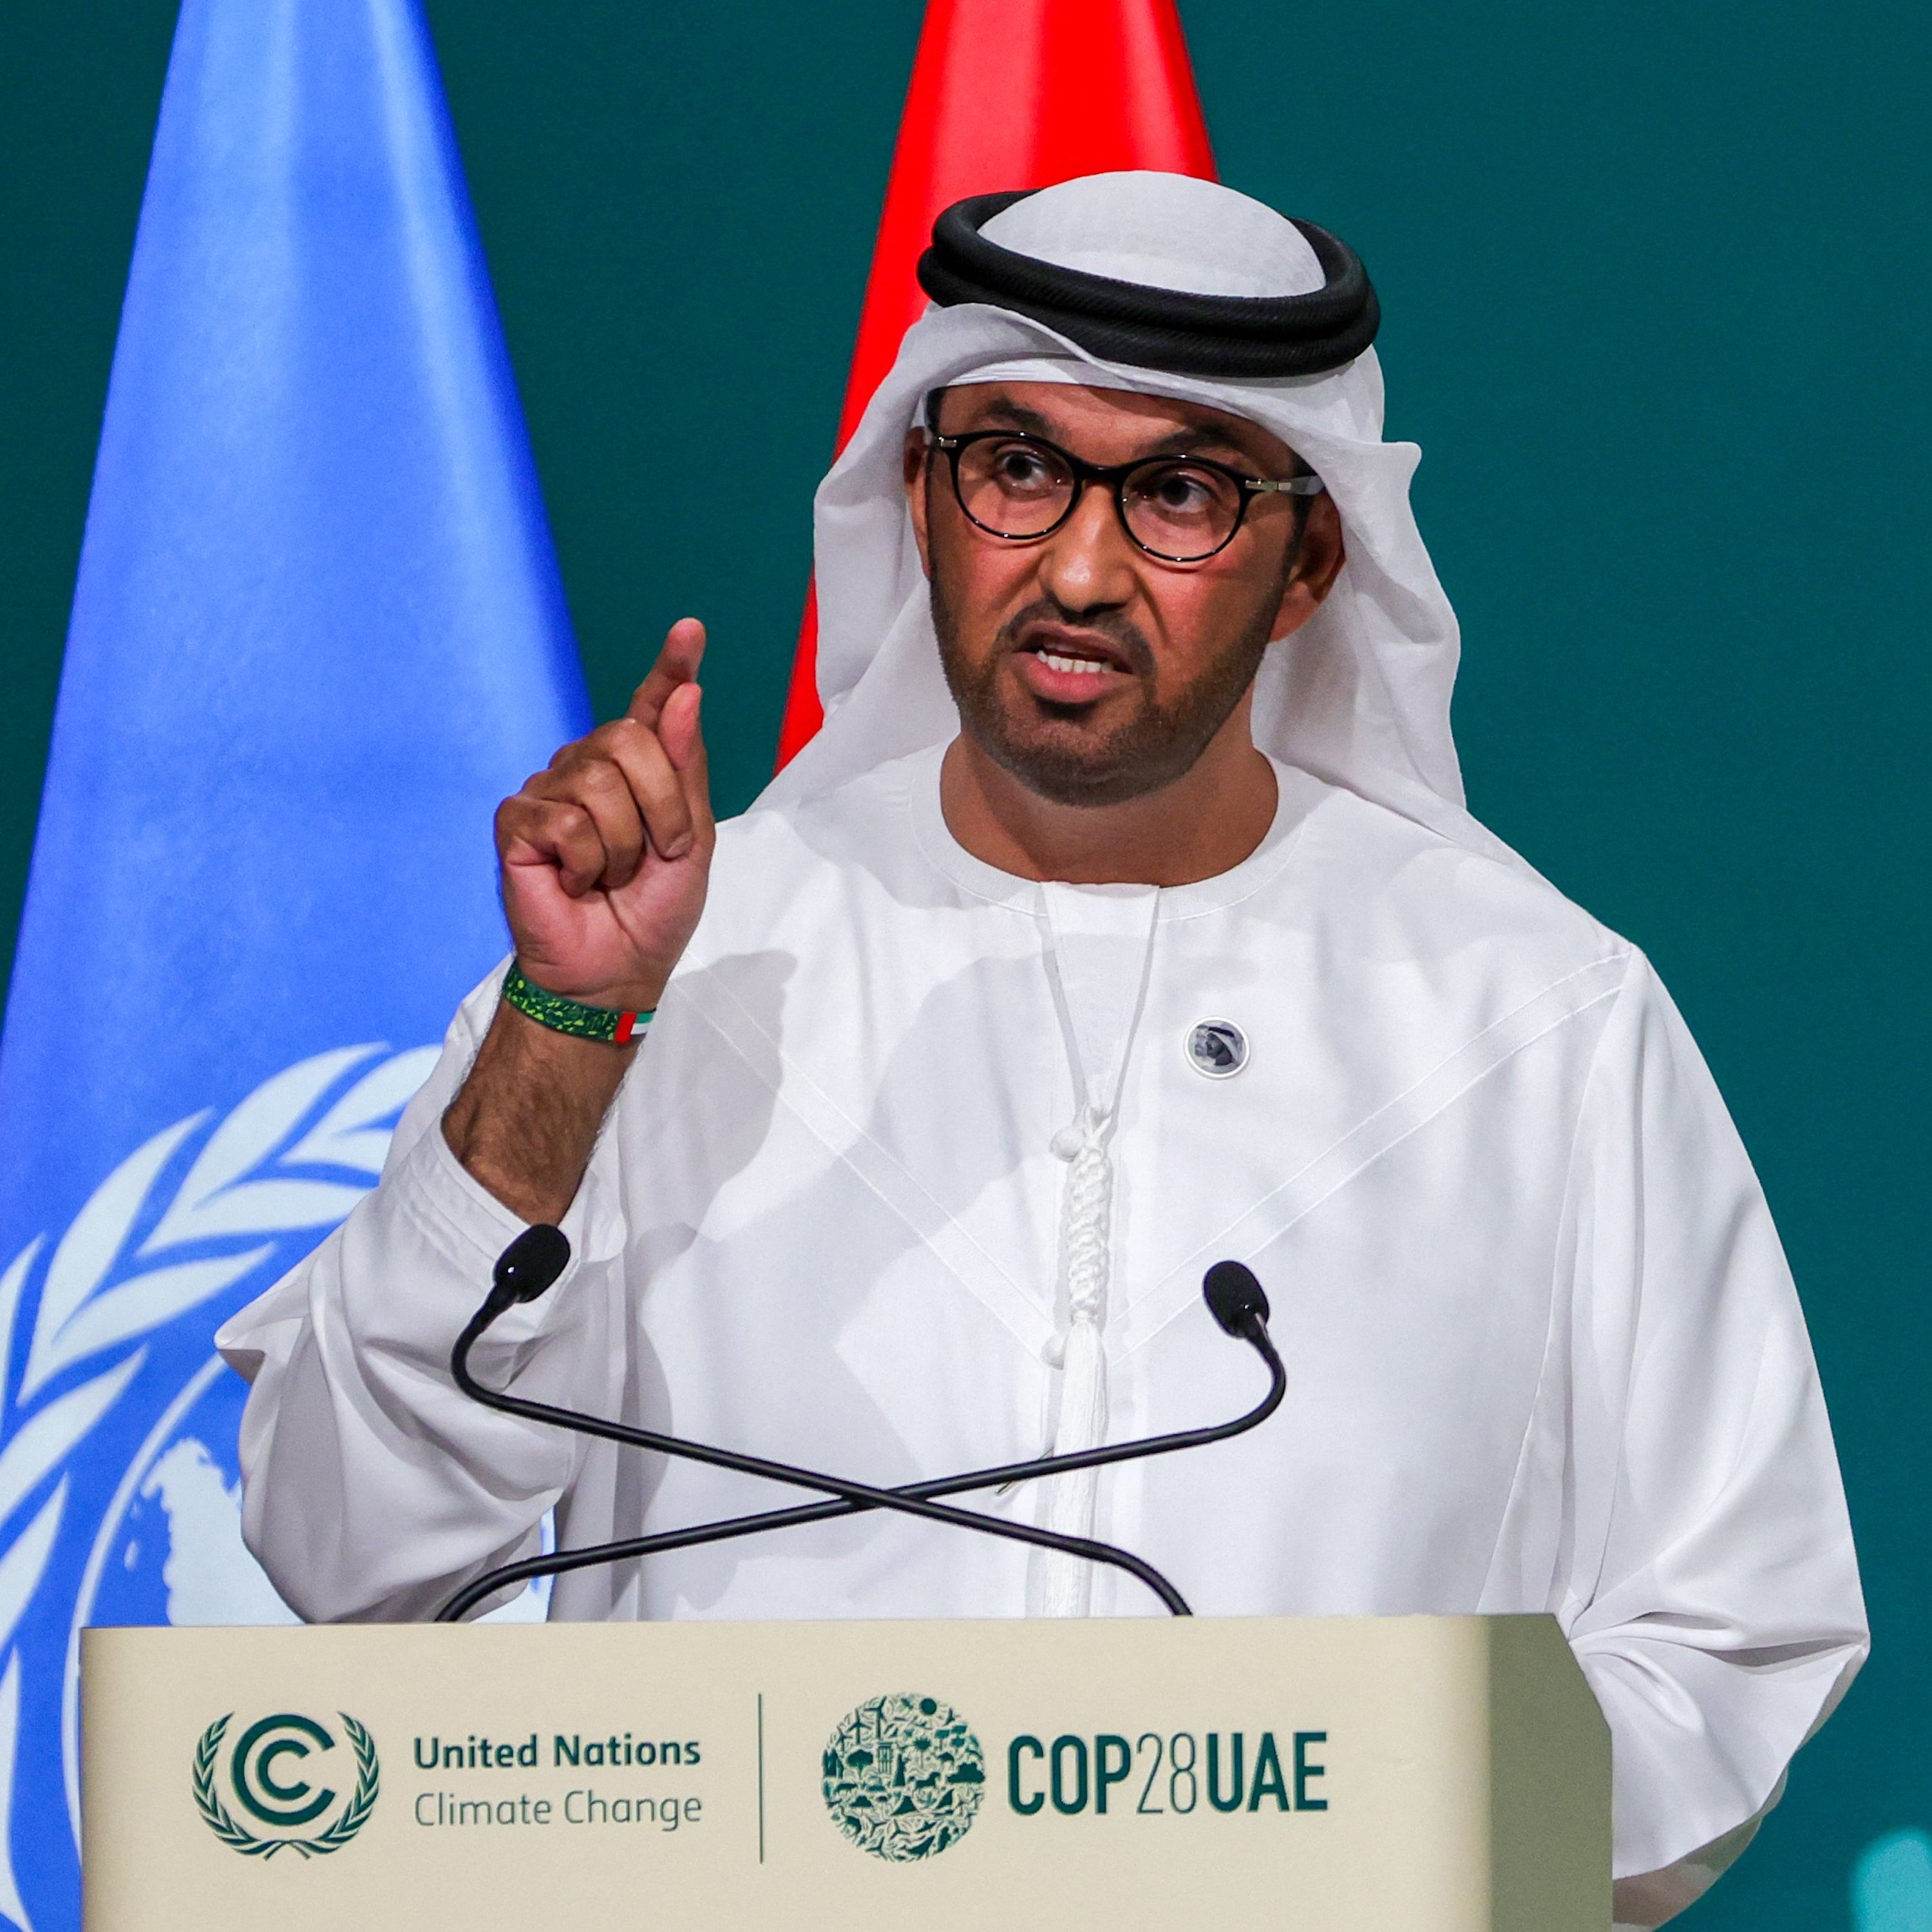 Controversy over holding a climate summit in oil-rich UAE